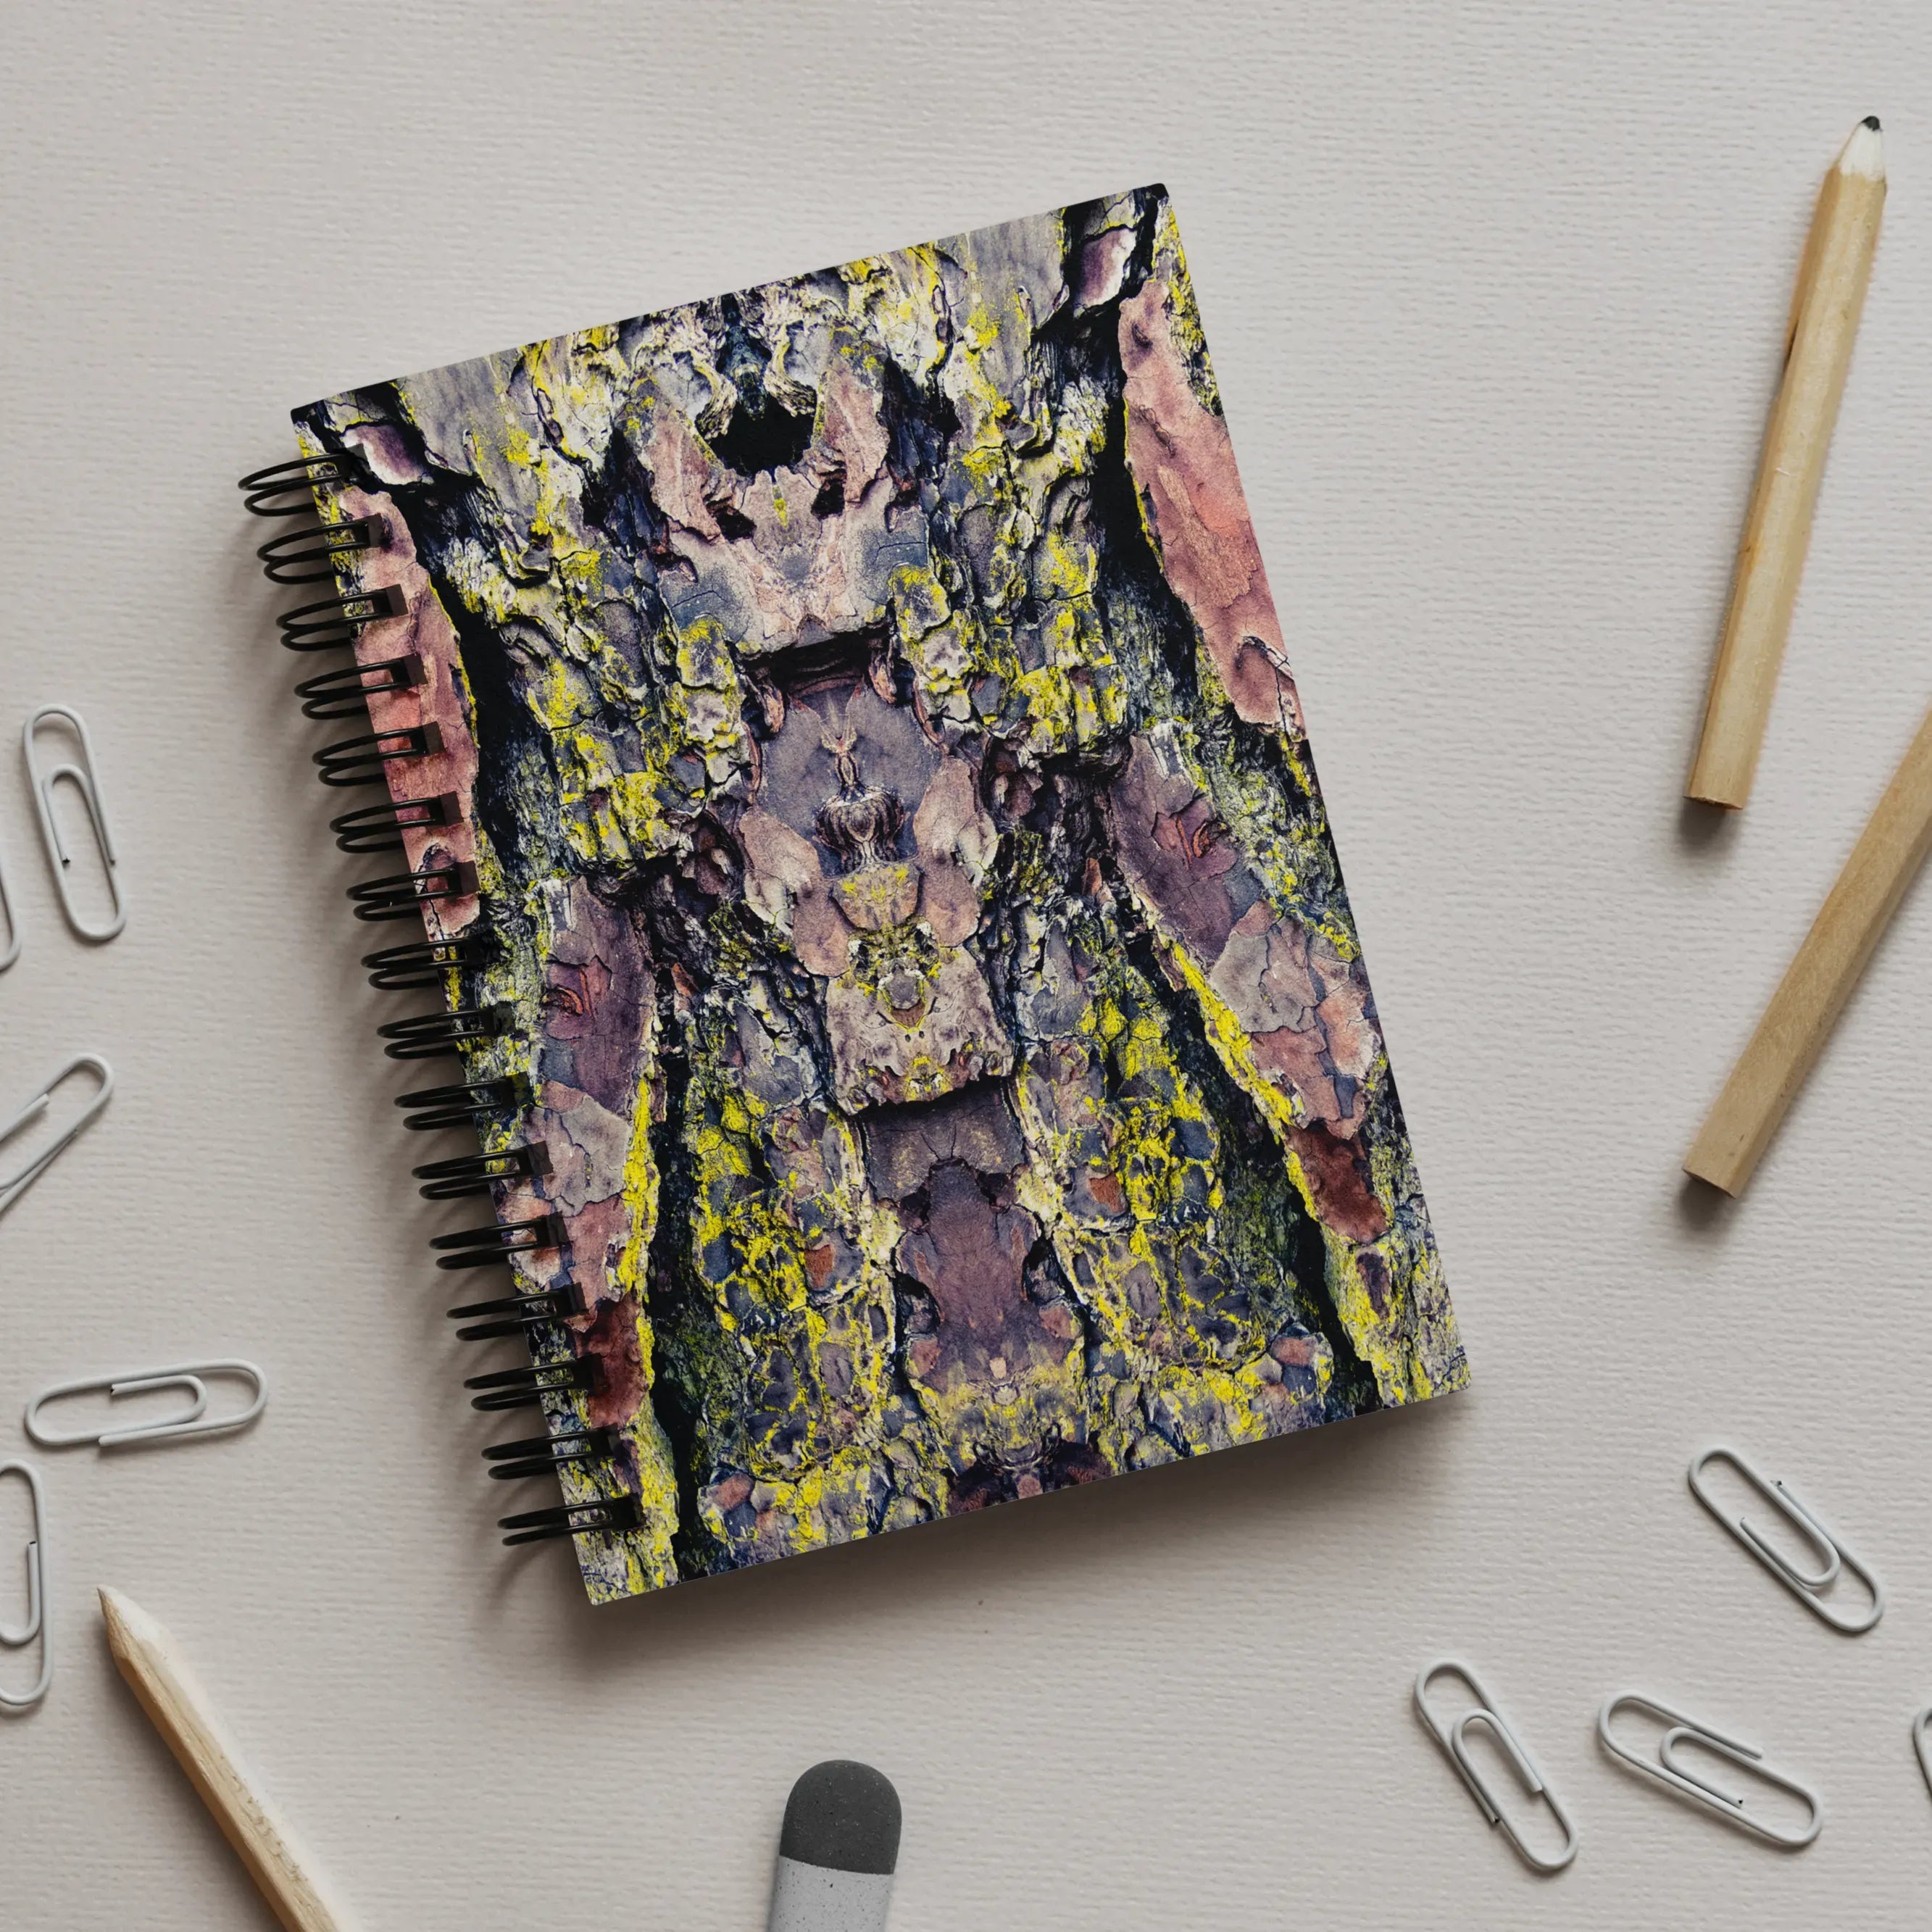 Barking Mad Too - Trippy Tree Trunk Art Notebook - Notebooks & Notepads - Aesthetic Art